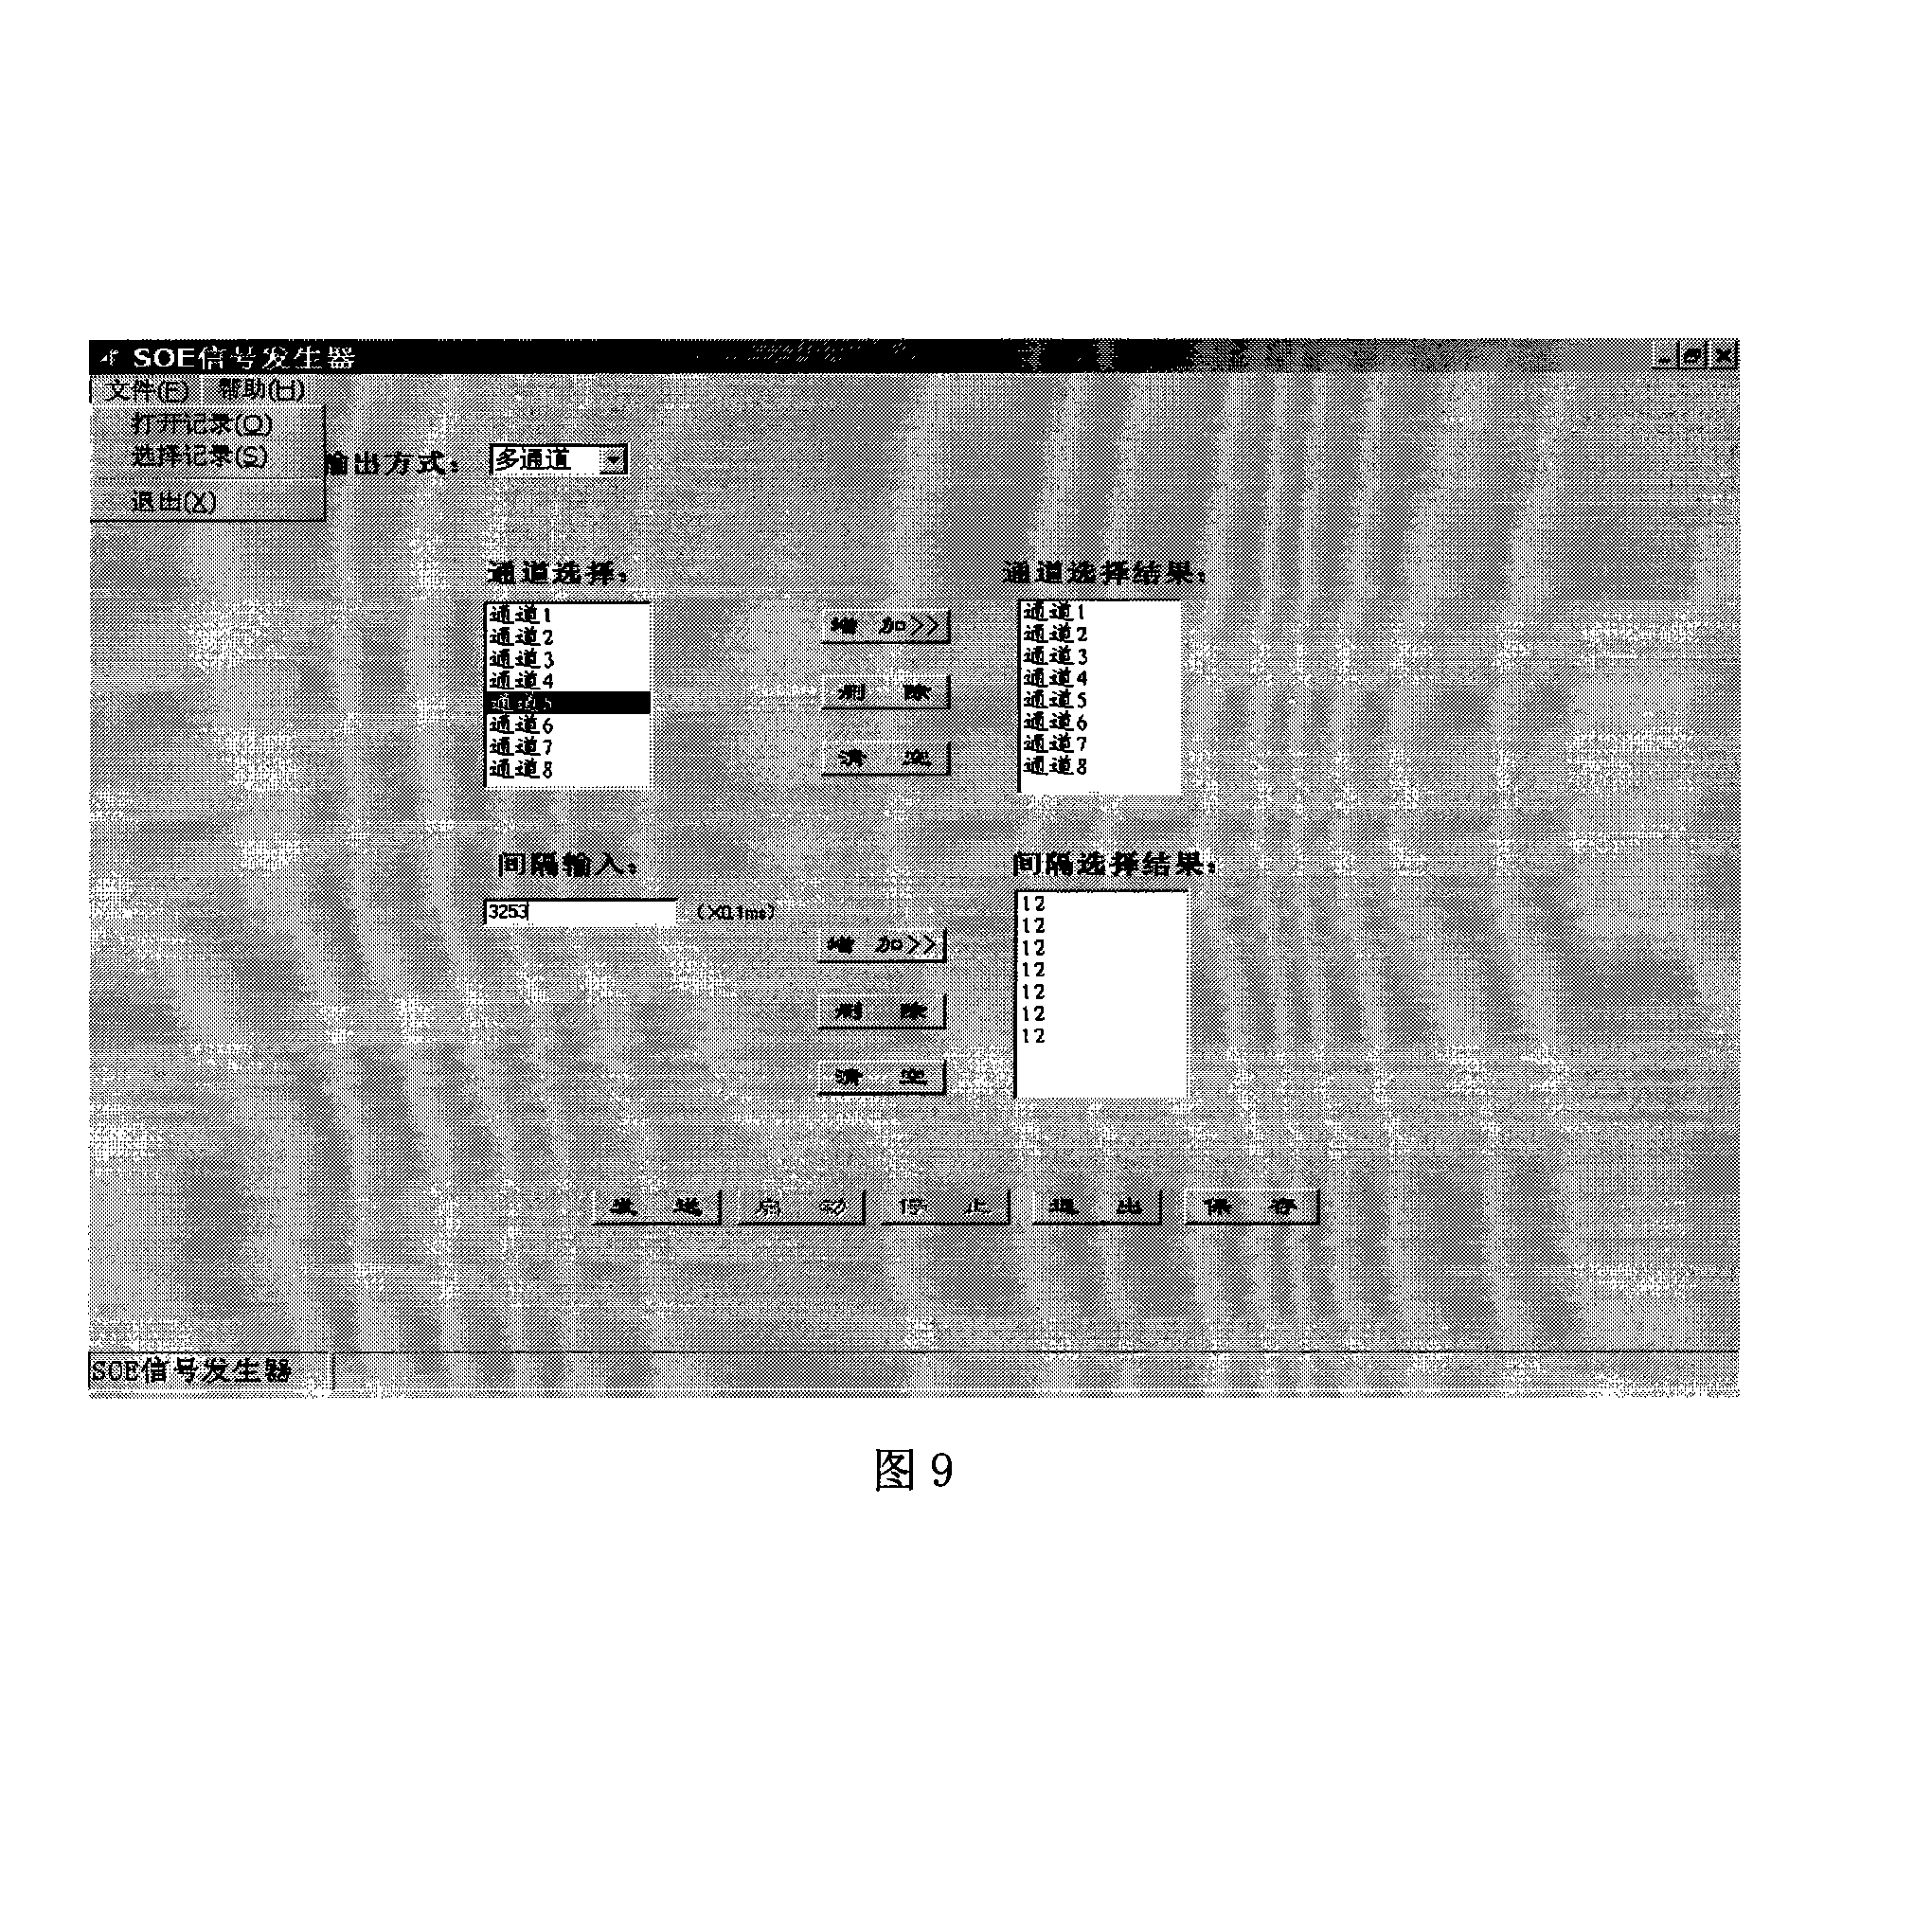 Portable sequential affair signal generating device